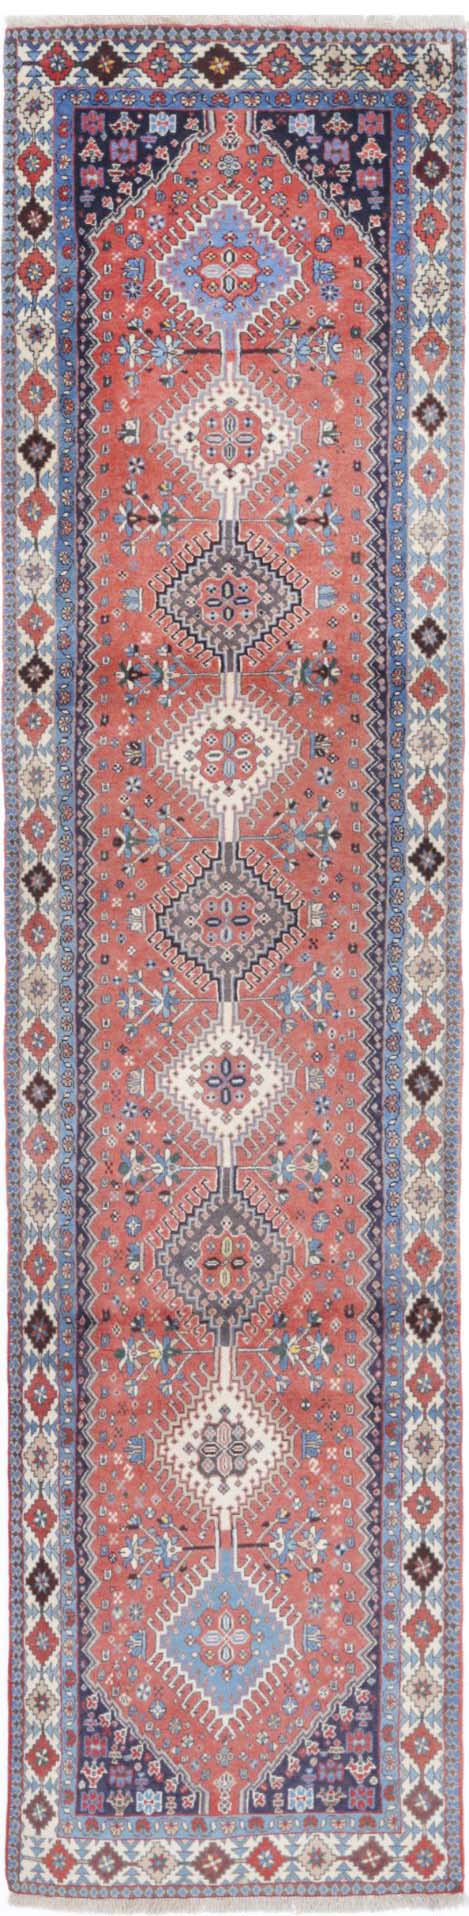 Hand Knotted Persian Yalameh Wool Rug - 2'8'' x 12'1''